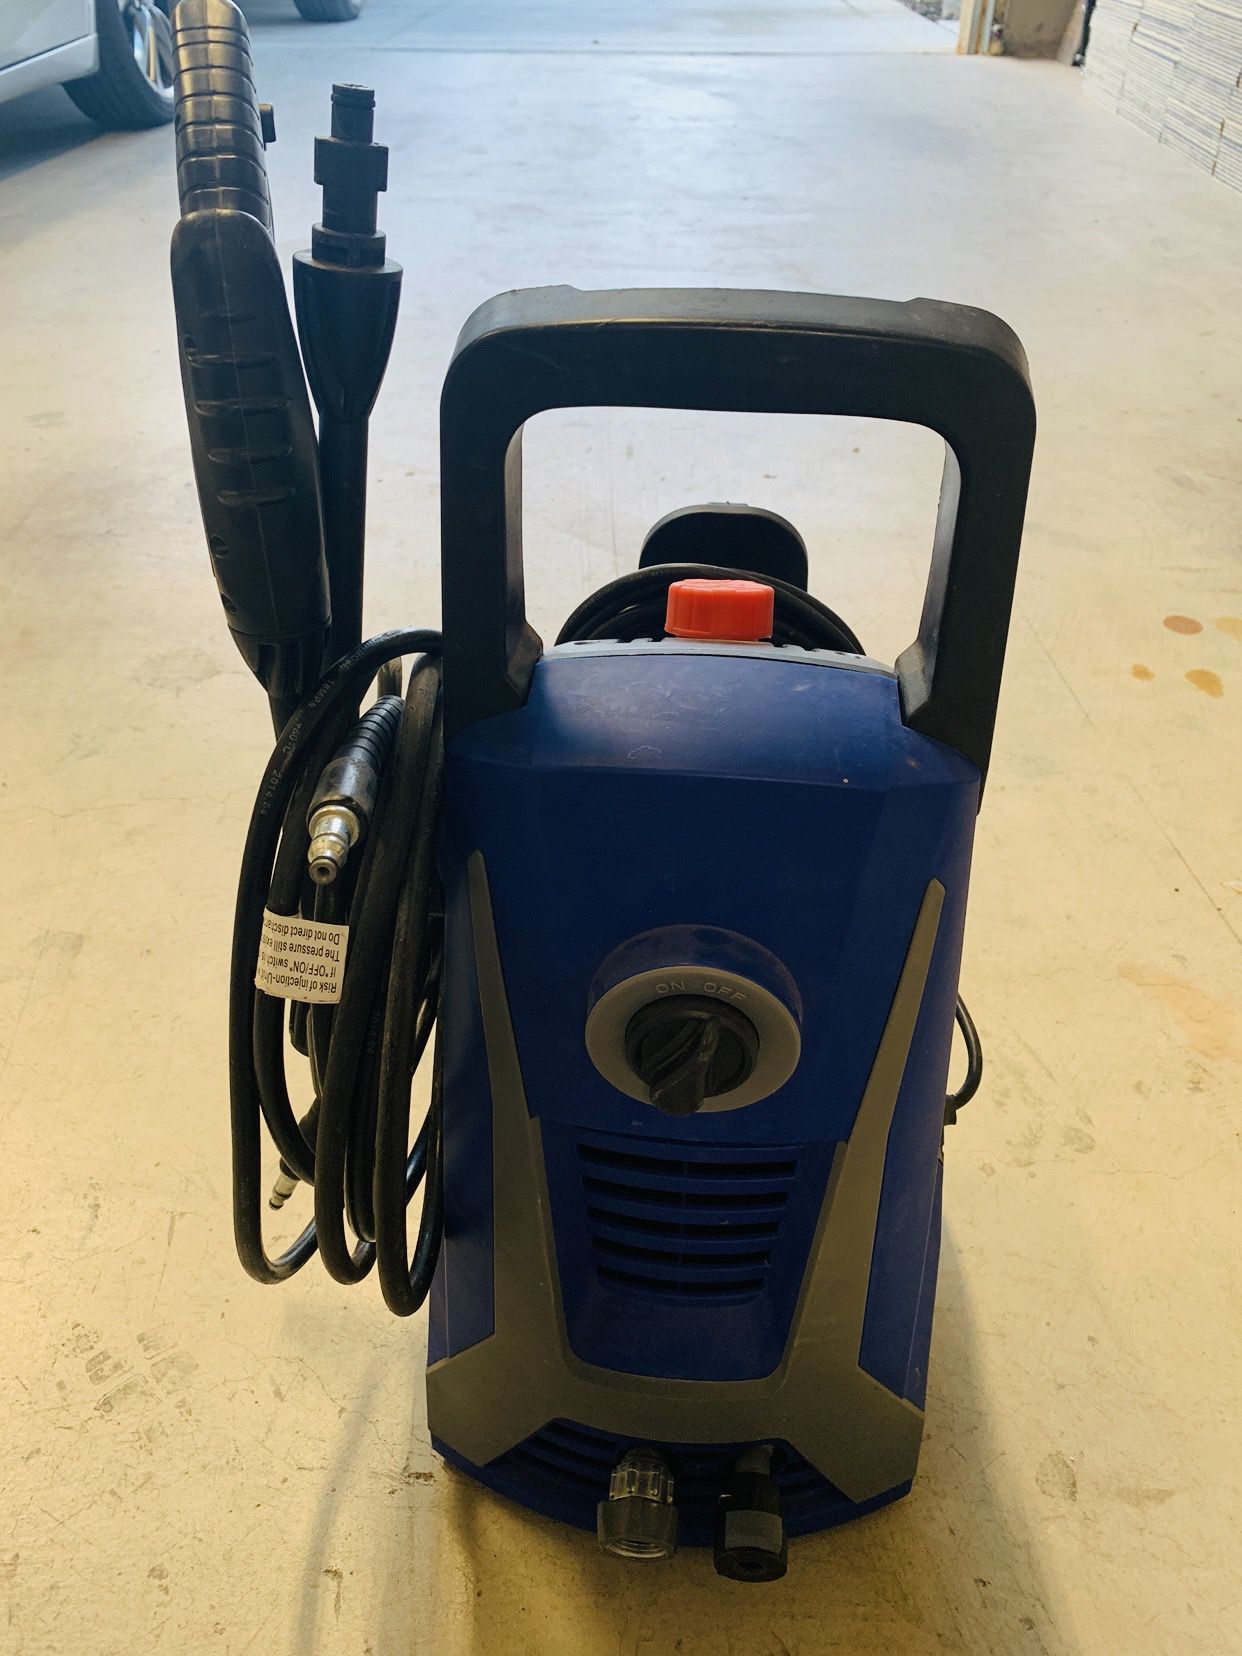 1500 psi Electric Pressure Washer - not working